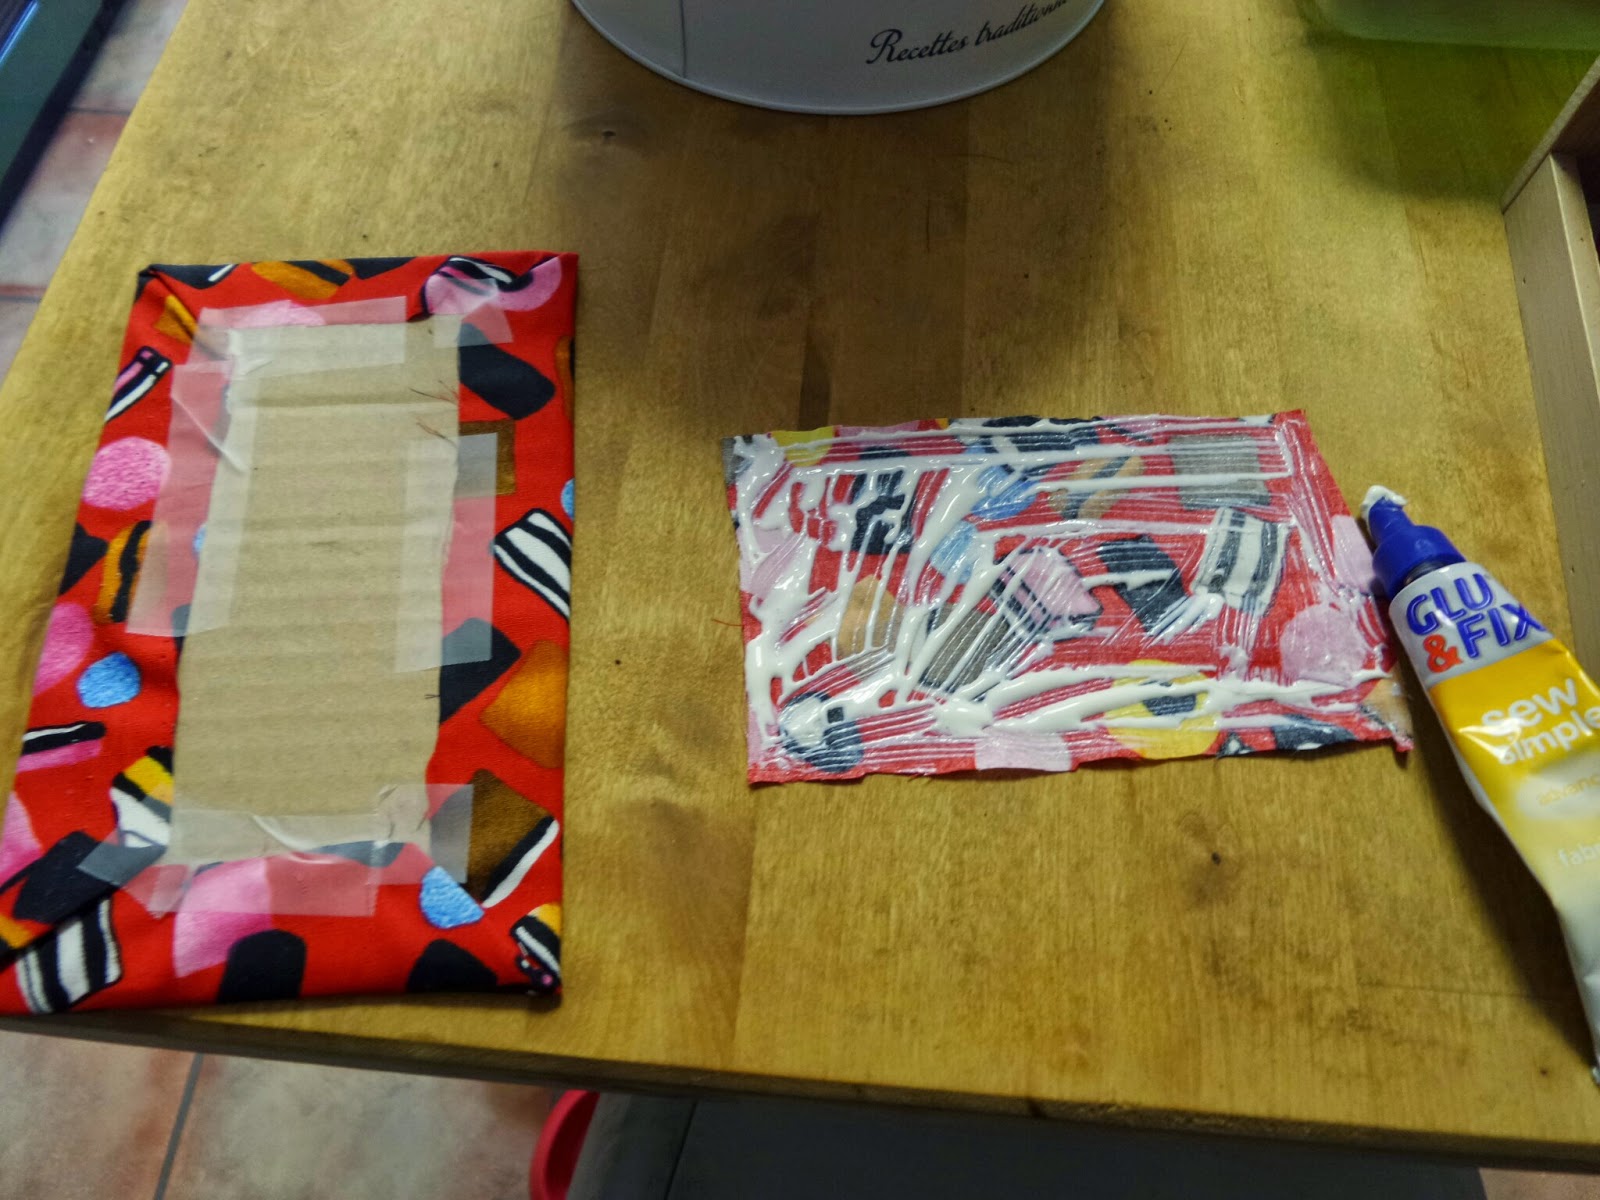 A Fabric Milkman's Wallet being made using Bostik's Sew Simple